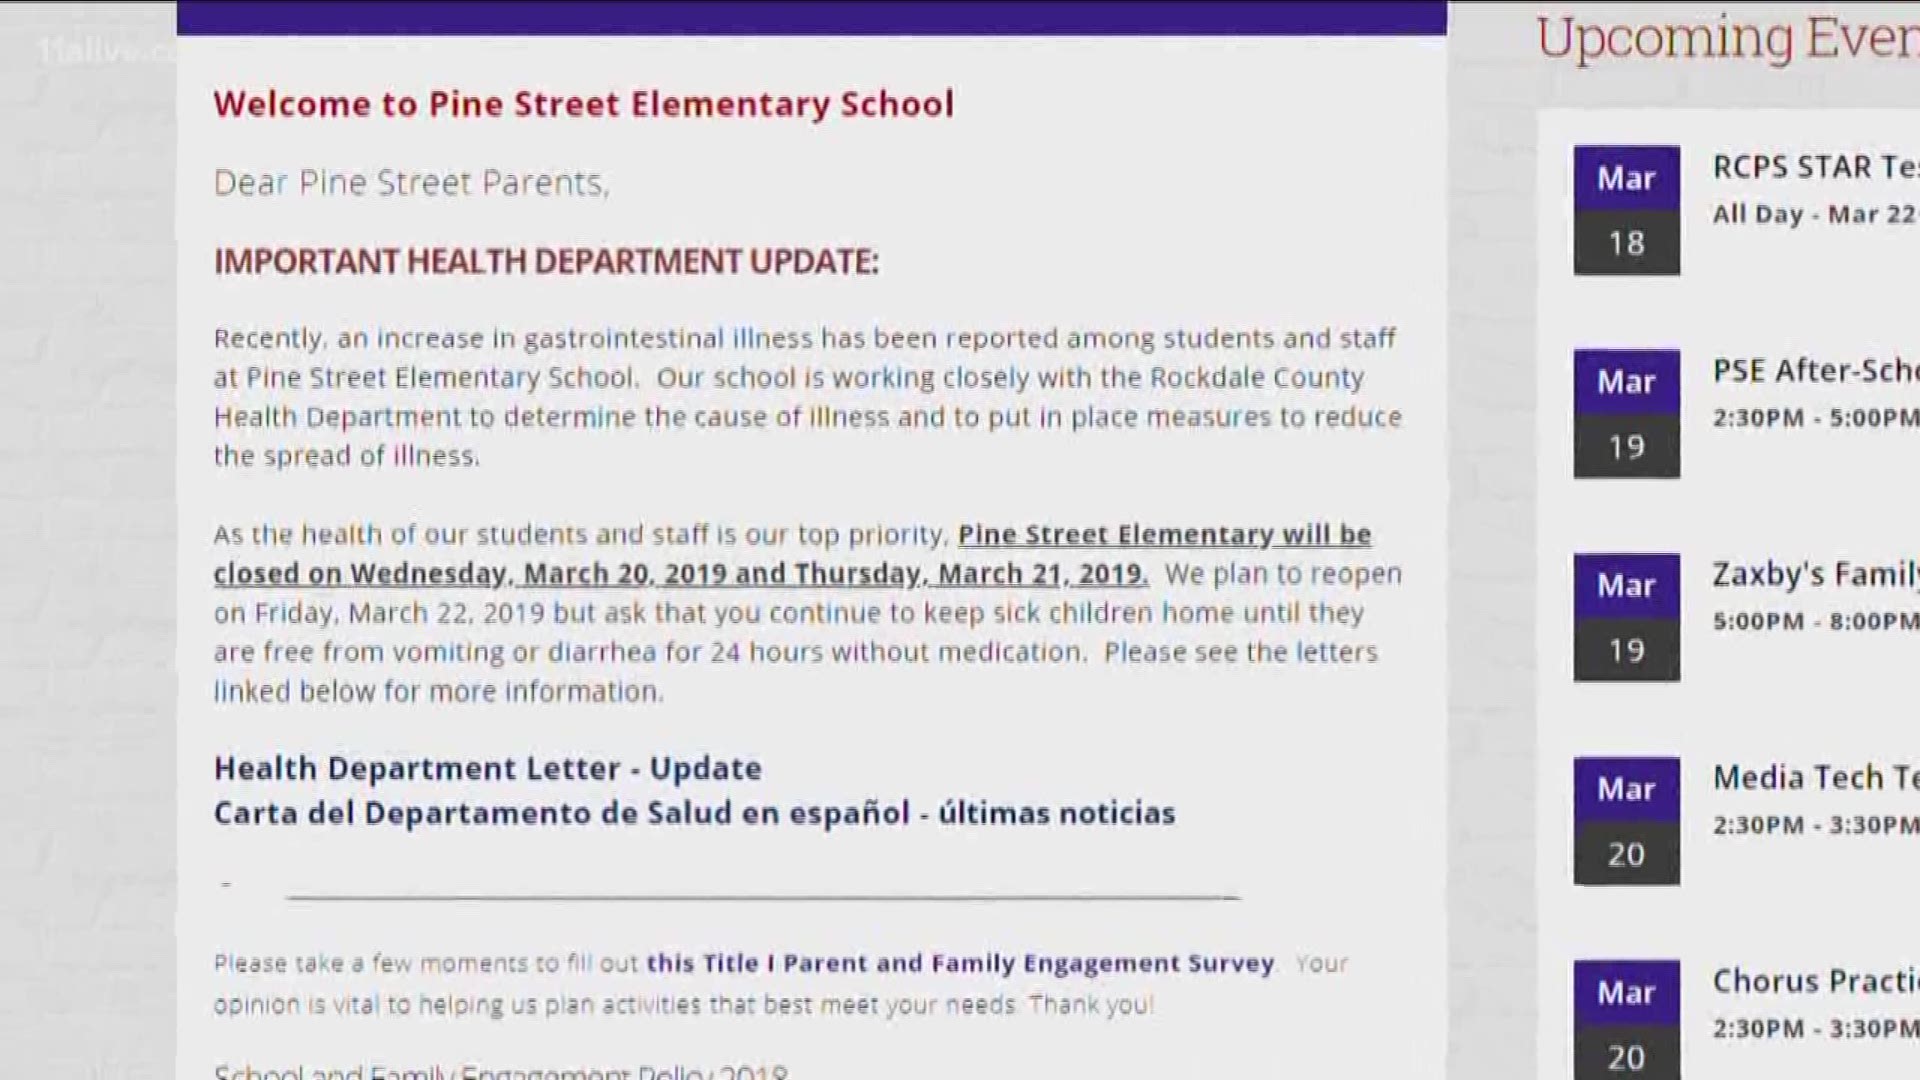 "As the health of our students and staff is our top priority, Pine Street Elementary will be closed on Wednesday, March 20, 2019, and Thursday, March 21, 2019," Principal Kim Vier wrote in a letter that afternoon.